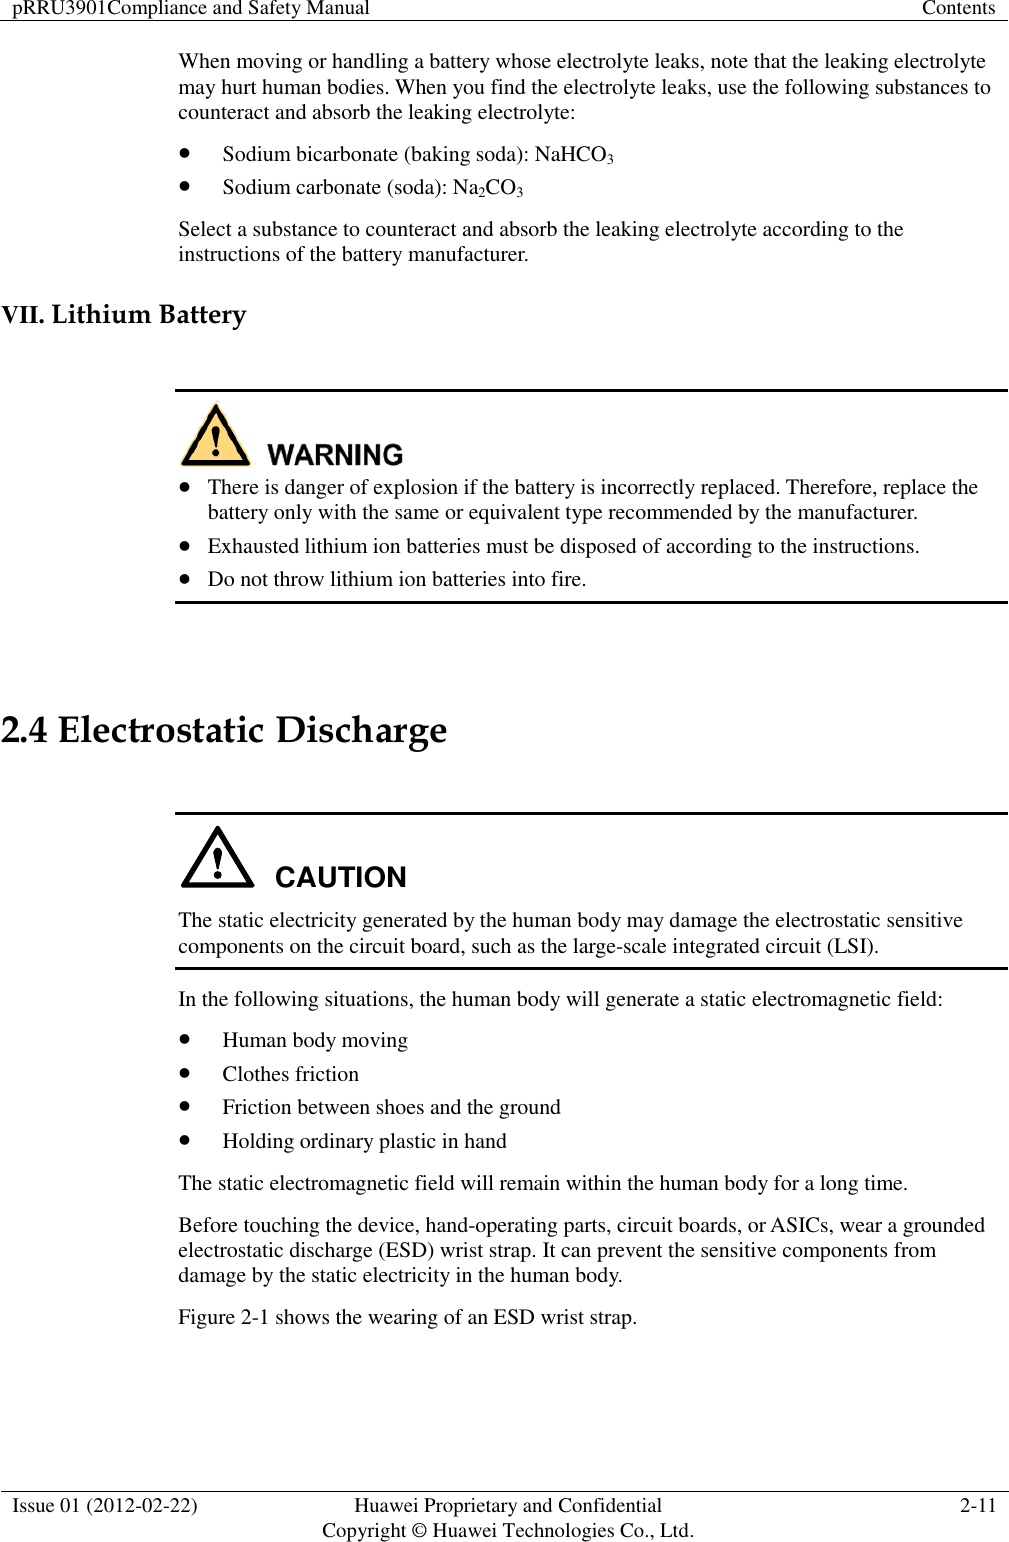 pRRU3901Compliance and Safety Manual Contents  Issue 01 (2012-02-22) Huawei Proprietary and Confidential           Copyright © Huawei Technologies Co., Ltd. 2-11  When moving or handling a battery whose electrolyte leaks, note that the leaking electrolyte may hurt human bodies. When you find the electrolyte leaks, use the following substances to counteract and absorb the leaking electrolyte:  Sodium bicarbonate (baking soda): NaHCO3  Sodium carbonate (soda): Na2CO3 Select a substance to counteract and absorb the leaking electrolyte according to the instructions of the battery manufacturer.   VII. Lithium Battery    There is danger of explosion if the battery is incorrectly replaced. Therefore, replace the battery only with the same or equivalent type recommended by the manufacturer.  Exhausted lithium ion batteries must be disposed of according to the instructions.  Do not throw lithium ion batteries into fire.    2.4 Electrostatic Discharge  CAUTION The static electricity generated by the human body may damage the electrostatic sensitive components on the circuit board, such as the large-scale integrated circuit (LSI). In the following situations, the human body will generate a static electromagnetic field:  Human body moving  Clothes friction  Friction between shoes and the ground  Holding ordinary plastic in hand The static electromagnetic field will remain within the human body for a long time. Before touching the device, hand-operating parts, circuit boards, or ASICs, wear a grounded electrostatic discharge (ESD) wrist strap. It can prevent the sensitive components from damage by the static electricity in the human body. Figure 2-1 shows the wearing of an ESD wrist strap. 